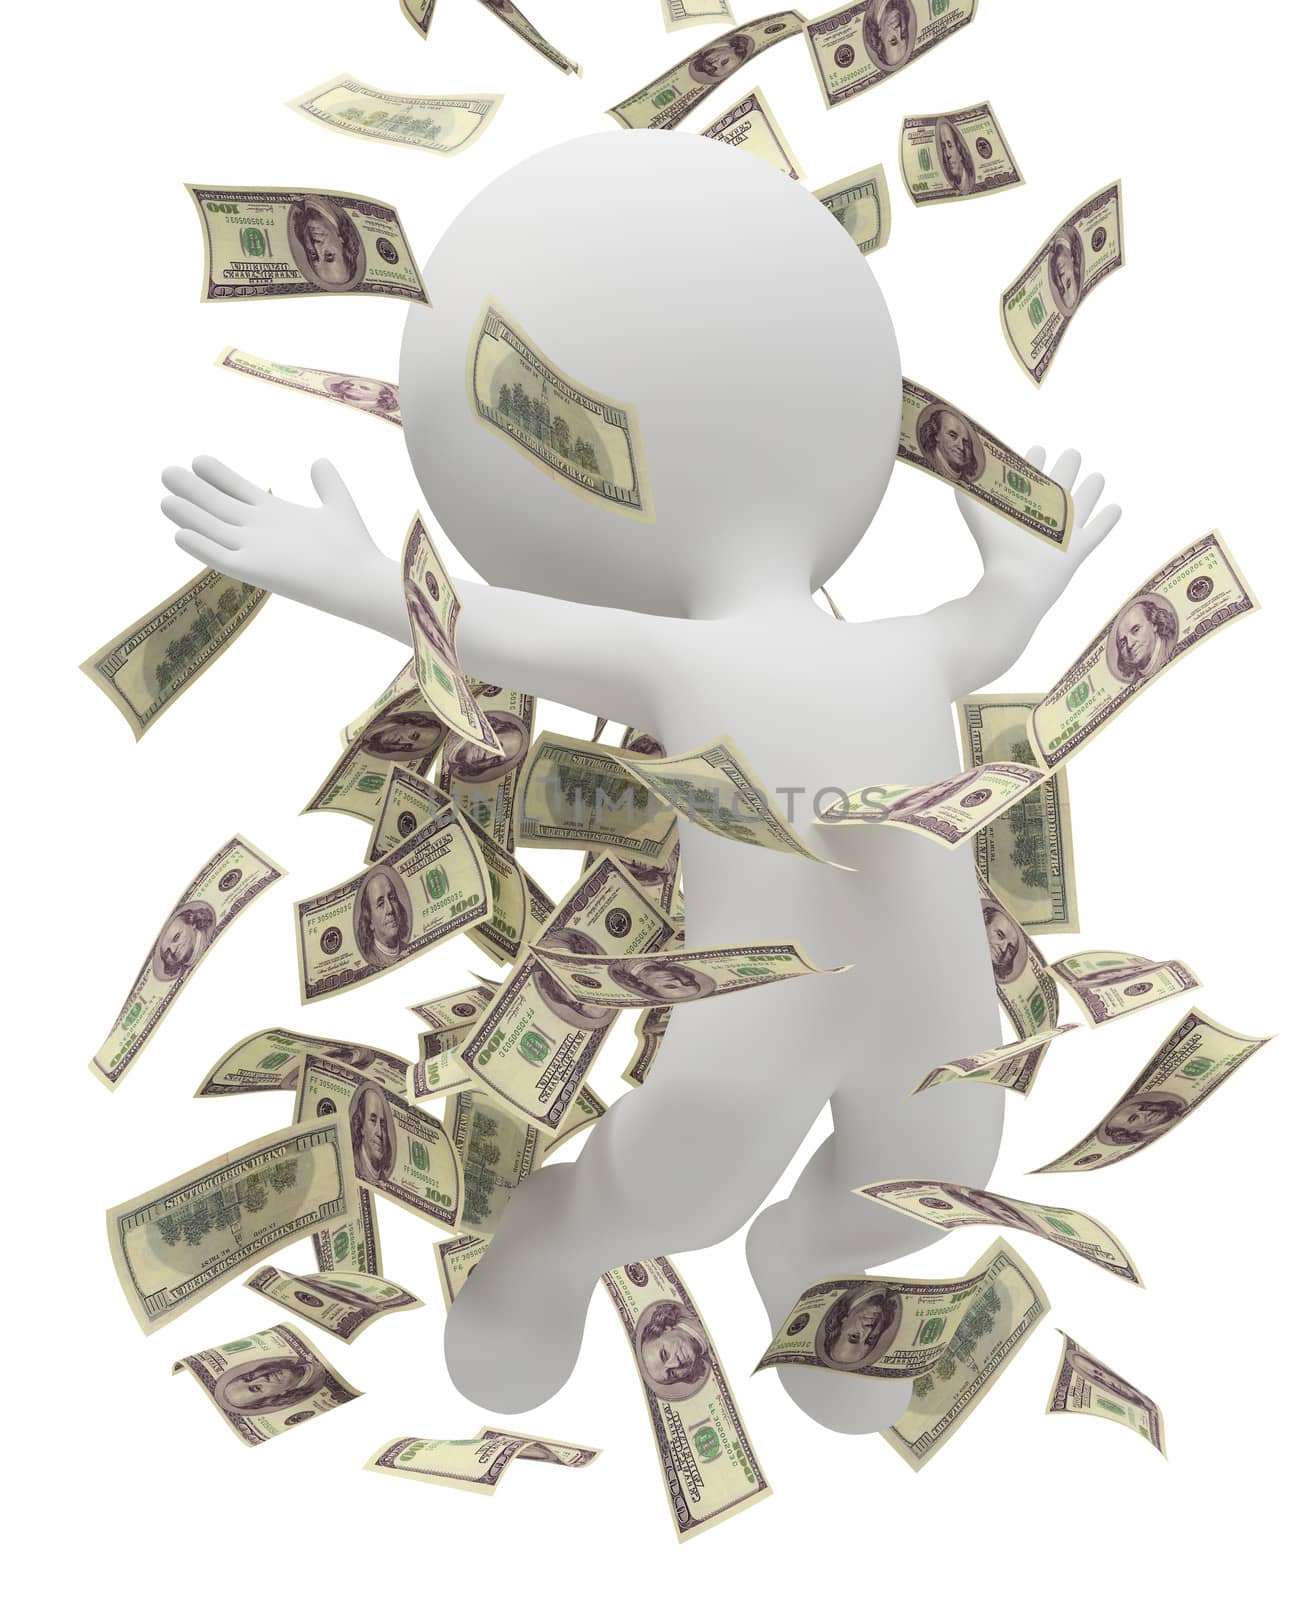 3d small people bathing in a heap of money. 3d image. Isolated white background.